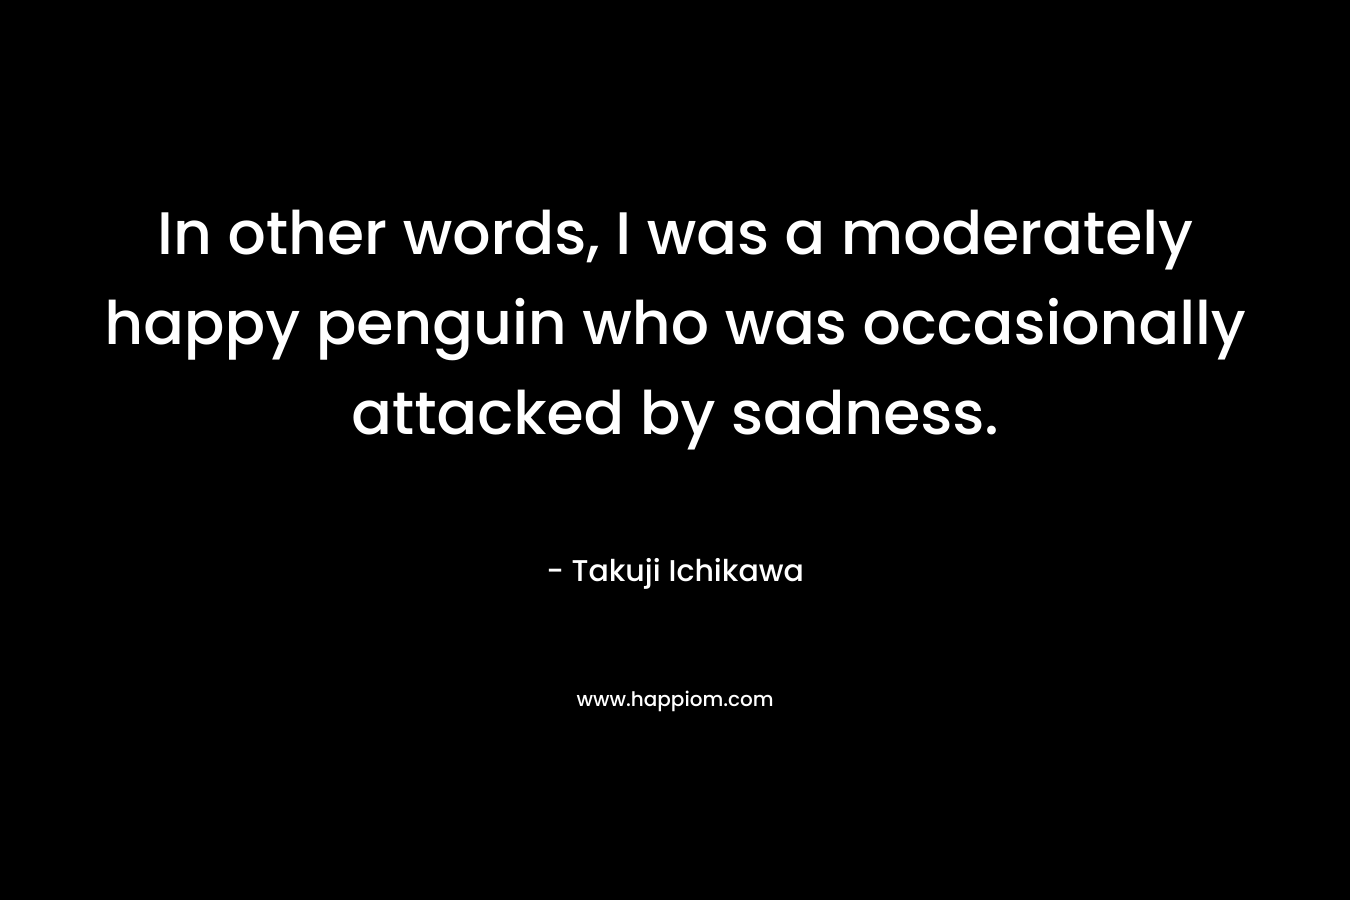 In other words, I was a moderately happy penguin who was occasionally attacked by sadness.